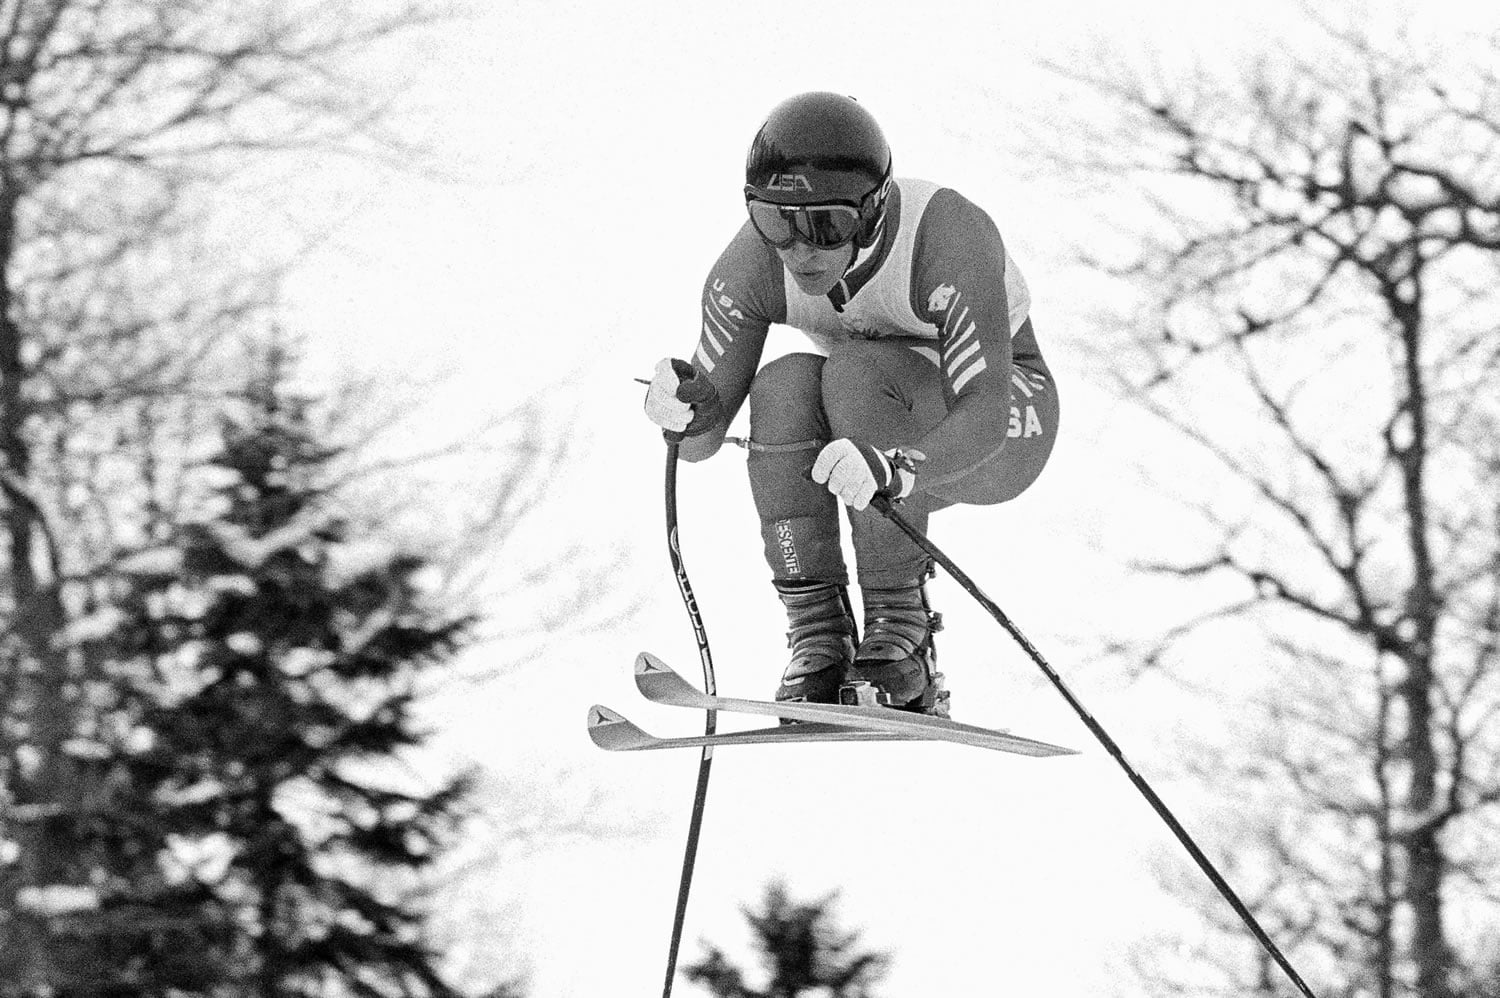 American Olympic downhill skier Bill Johnson races Feb. 6, 1984, during the third training run for the Winter Olympic alpine skiing events, near Sarajevo, Bosnia-Herzegovina. The U.S. ski team says the former Olympic downhill champion has died after a long illness. He was 55. Megan Harrod, a spokeswoman for the U.S. Alpine team, says Johnson died Thursday at an assisted living facility in Gresham, Ore.